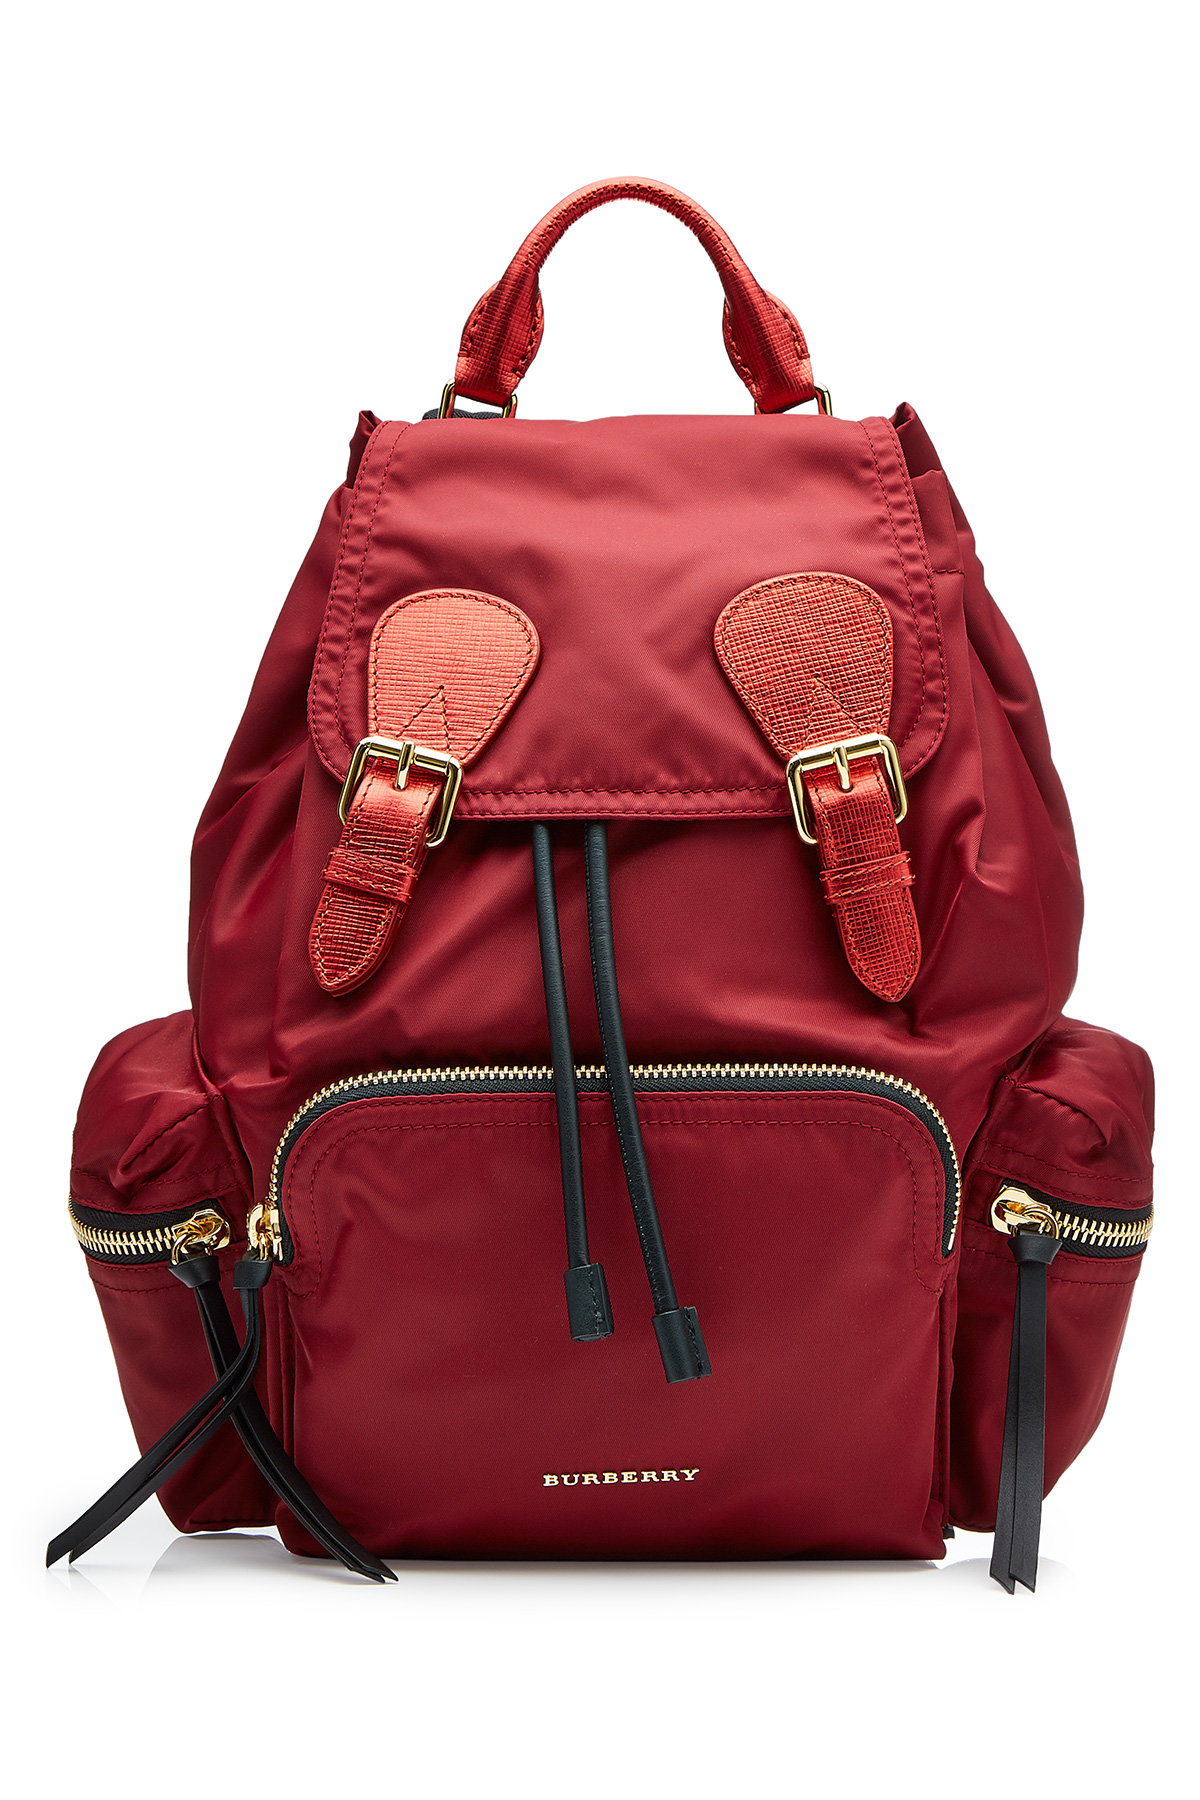 Burberry - Medium Fabric Backpack with Leather